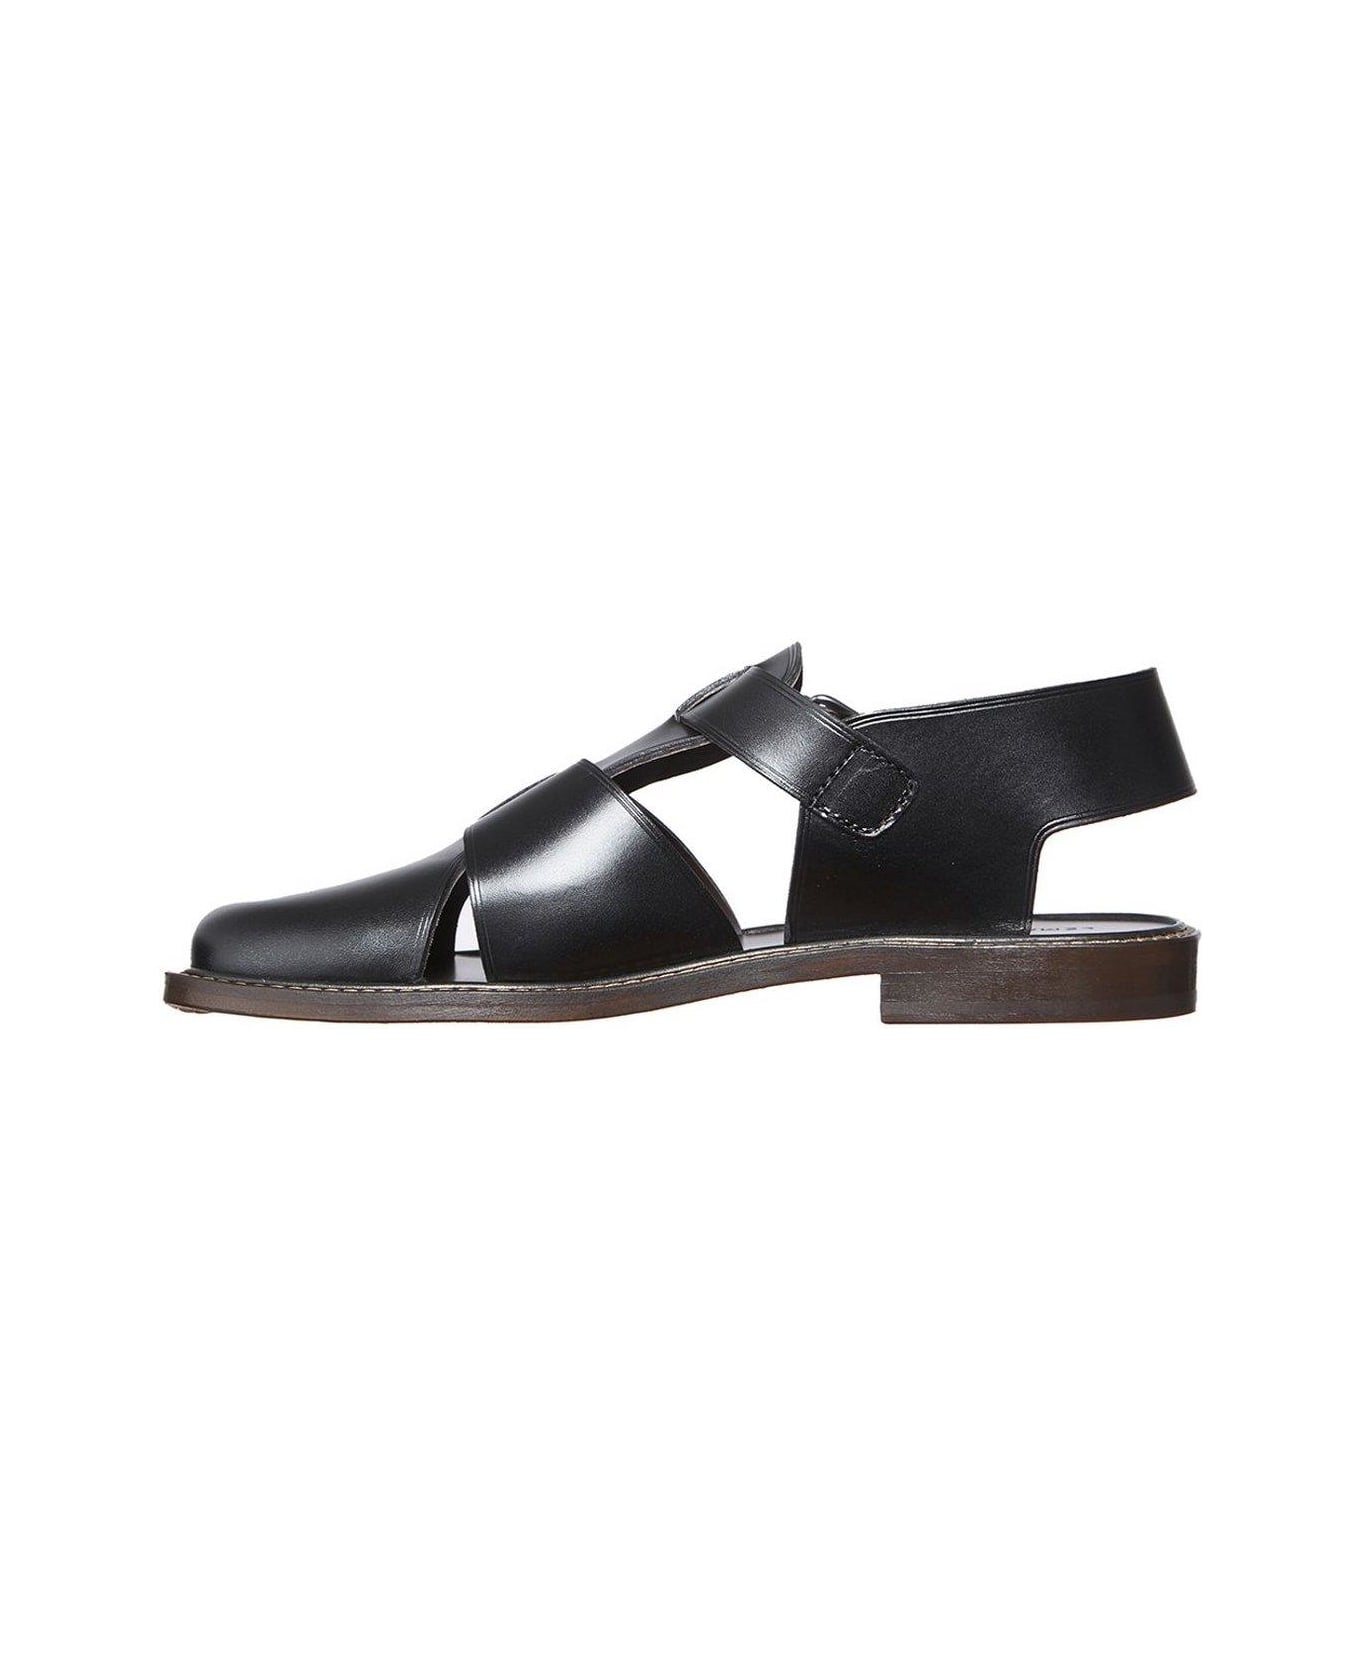 Lemaire Buckled Slingback Sandals - BLACK その他各種シューズ